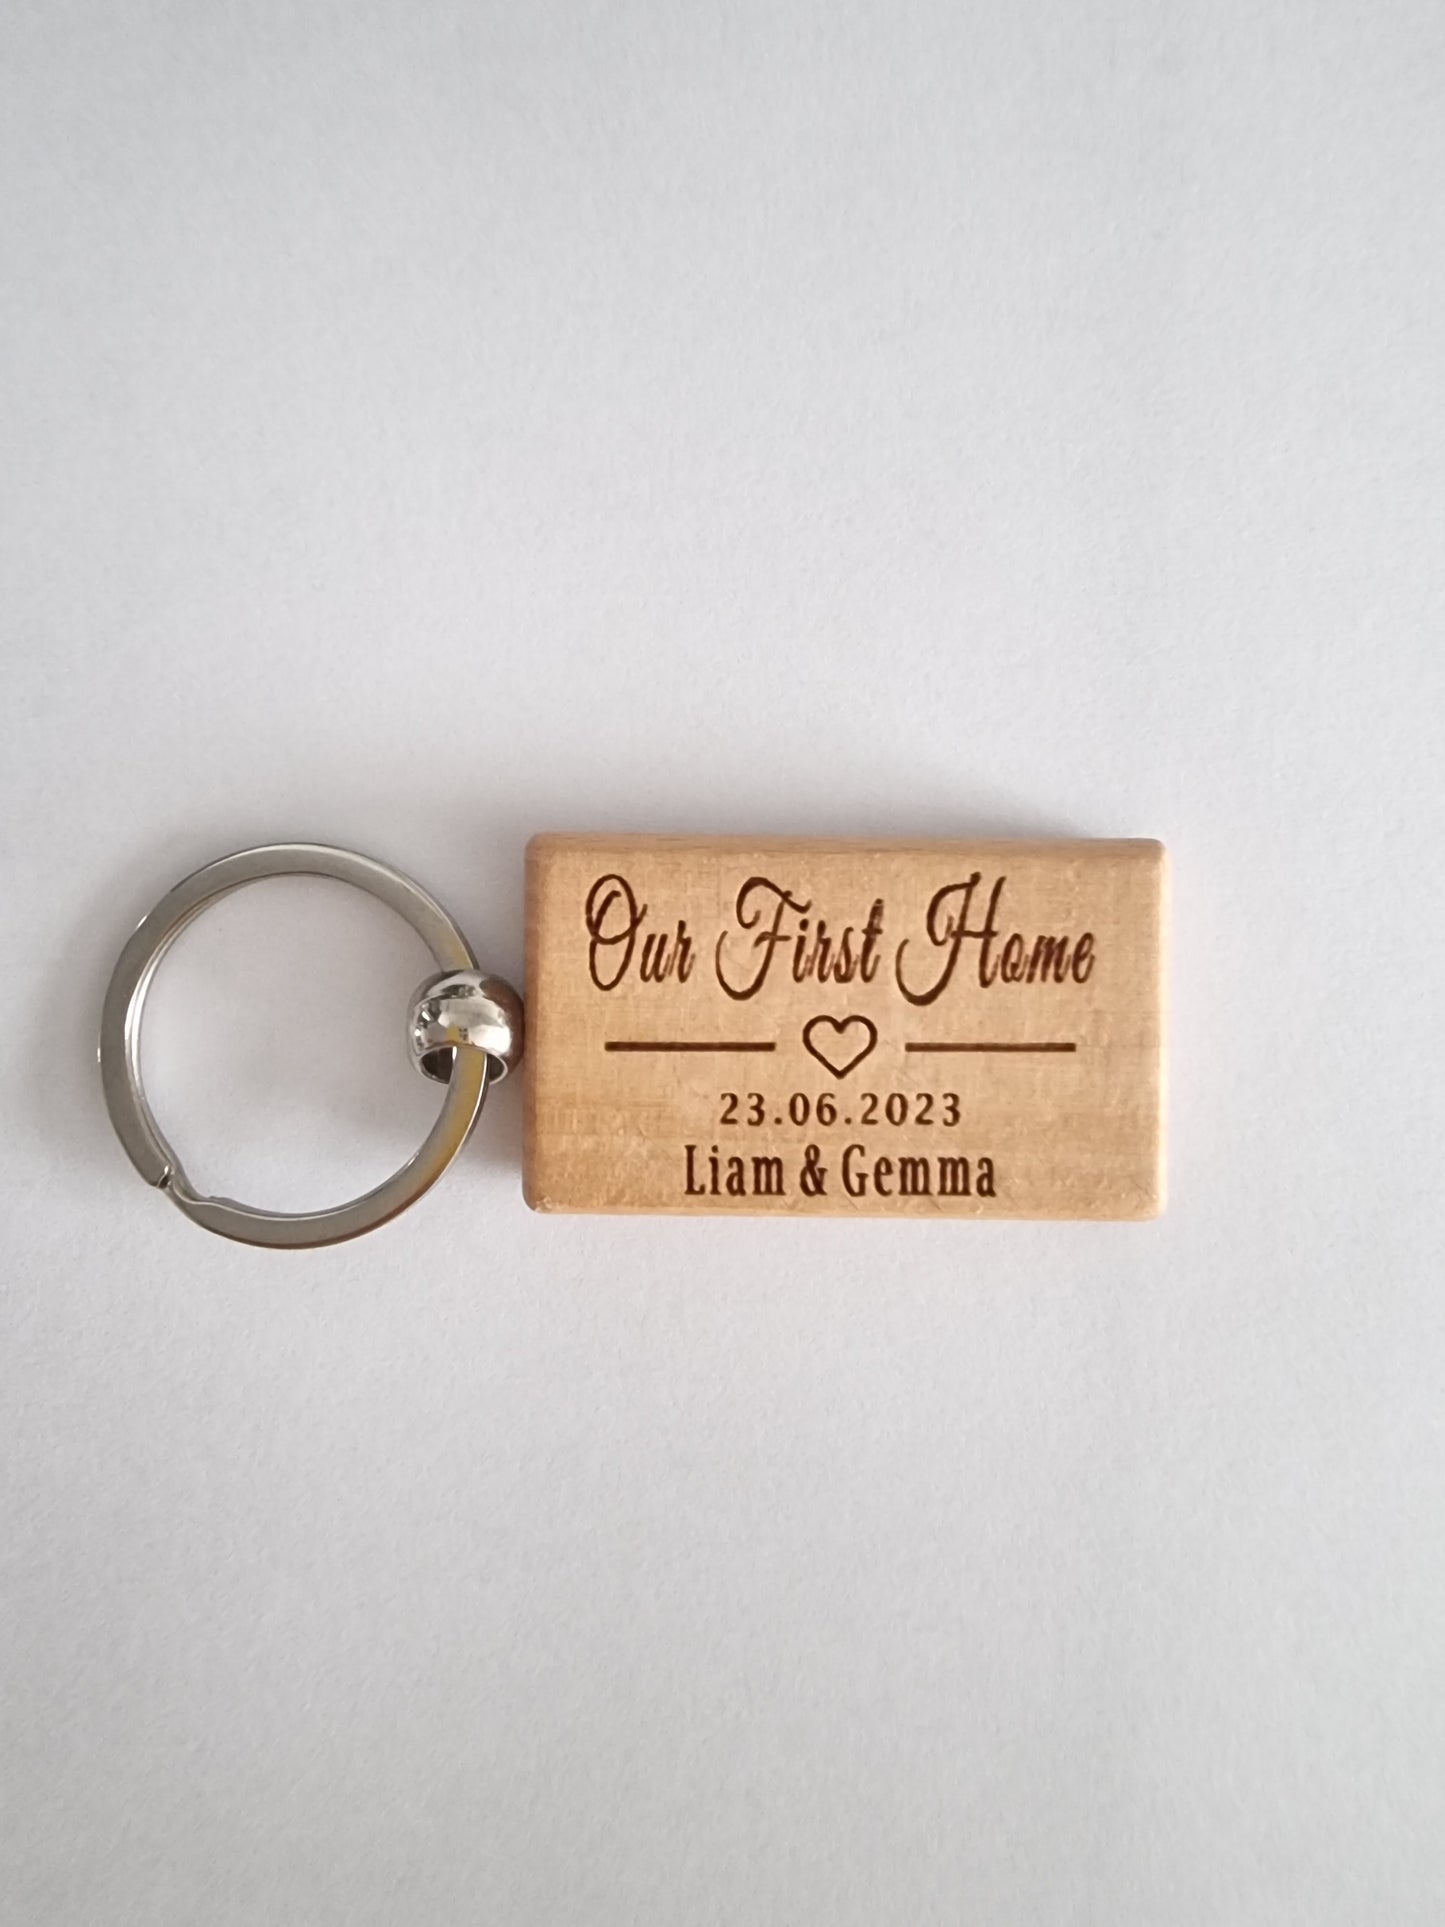 x2  Our first home Personalised keyring.